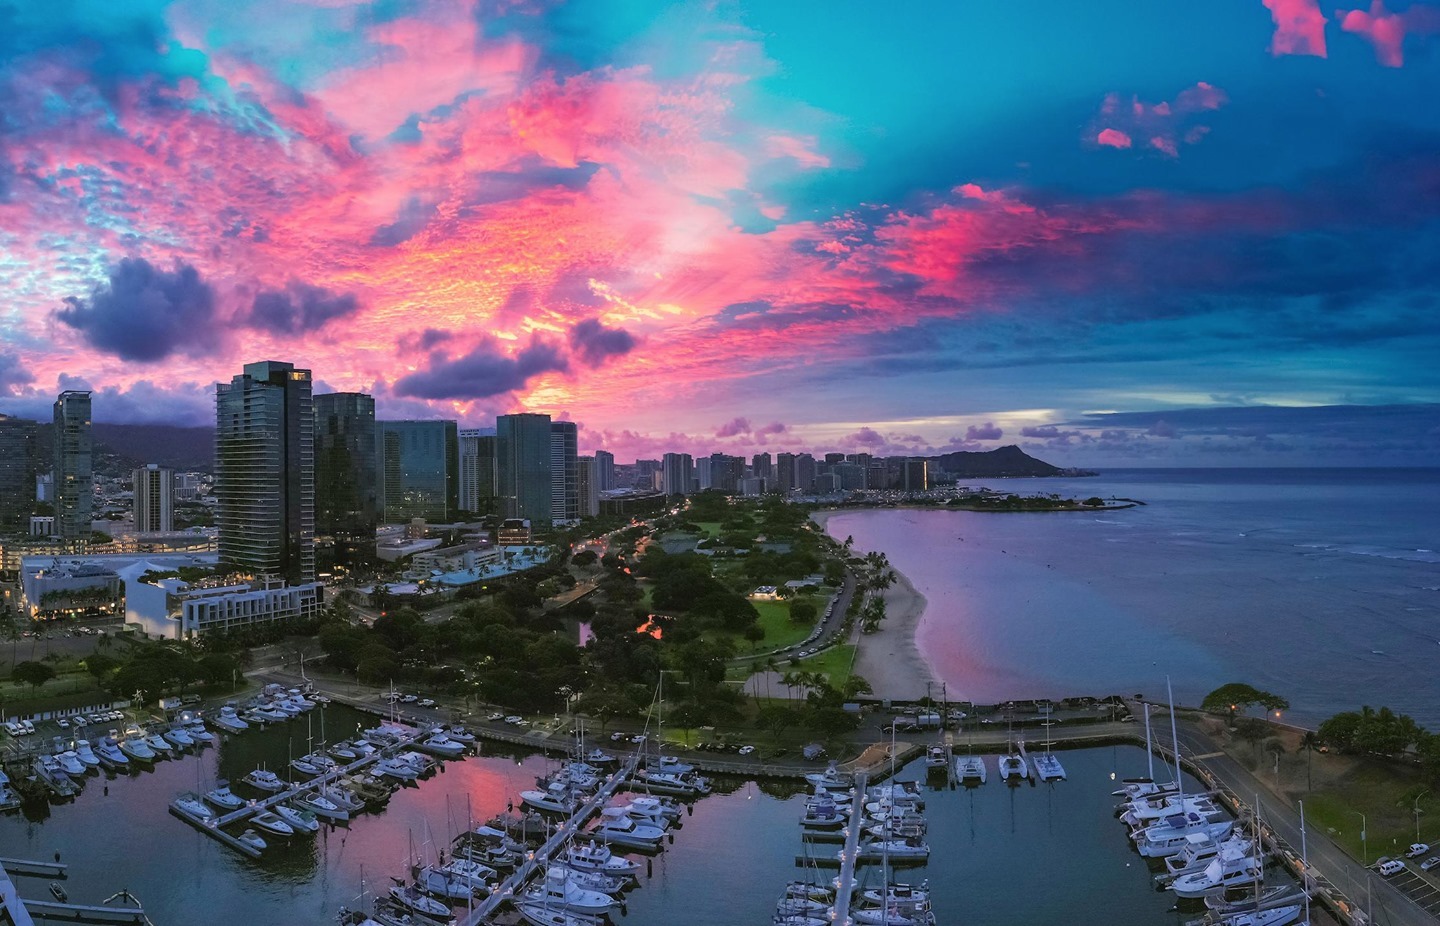 Our location on Oahu’s South Shore gives us great seats to stunning sunsets, but have you seen the sunrises here, too? They’re equally as gorgeous and a great way to start your day before shopping, dining, and exploring this vibrant master-planned community.